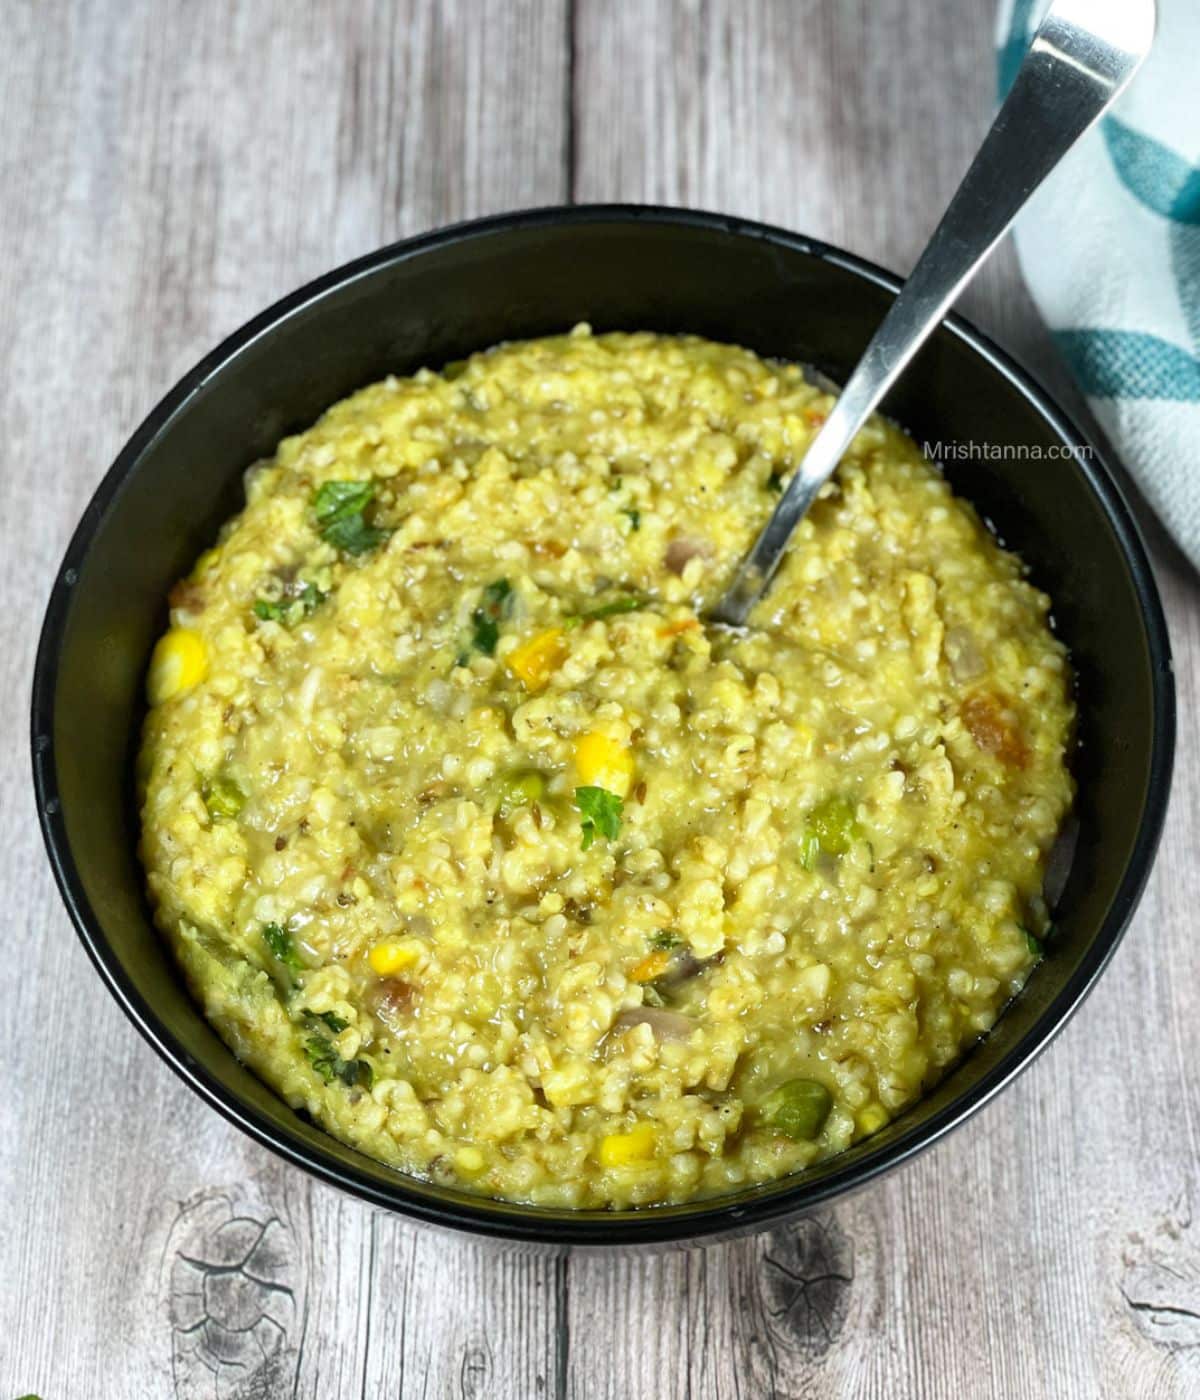 A bowl of oats khichdi is on the table with a spoon inserted.